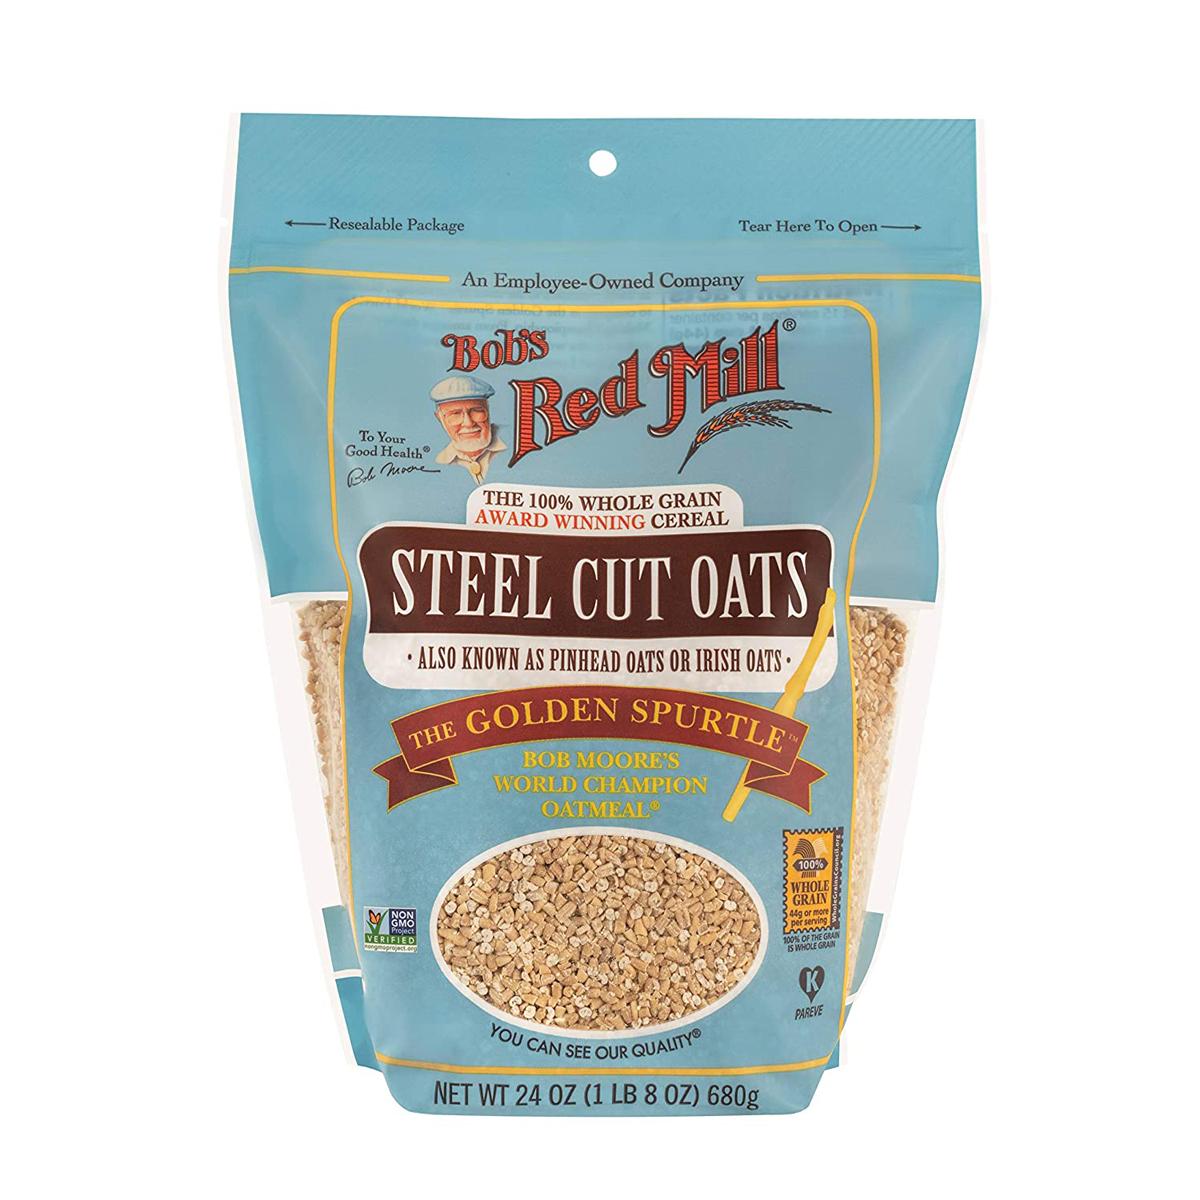 Bobs Red Mill Steel Cut Oats 4 Pack for $11.16